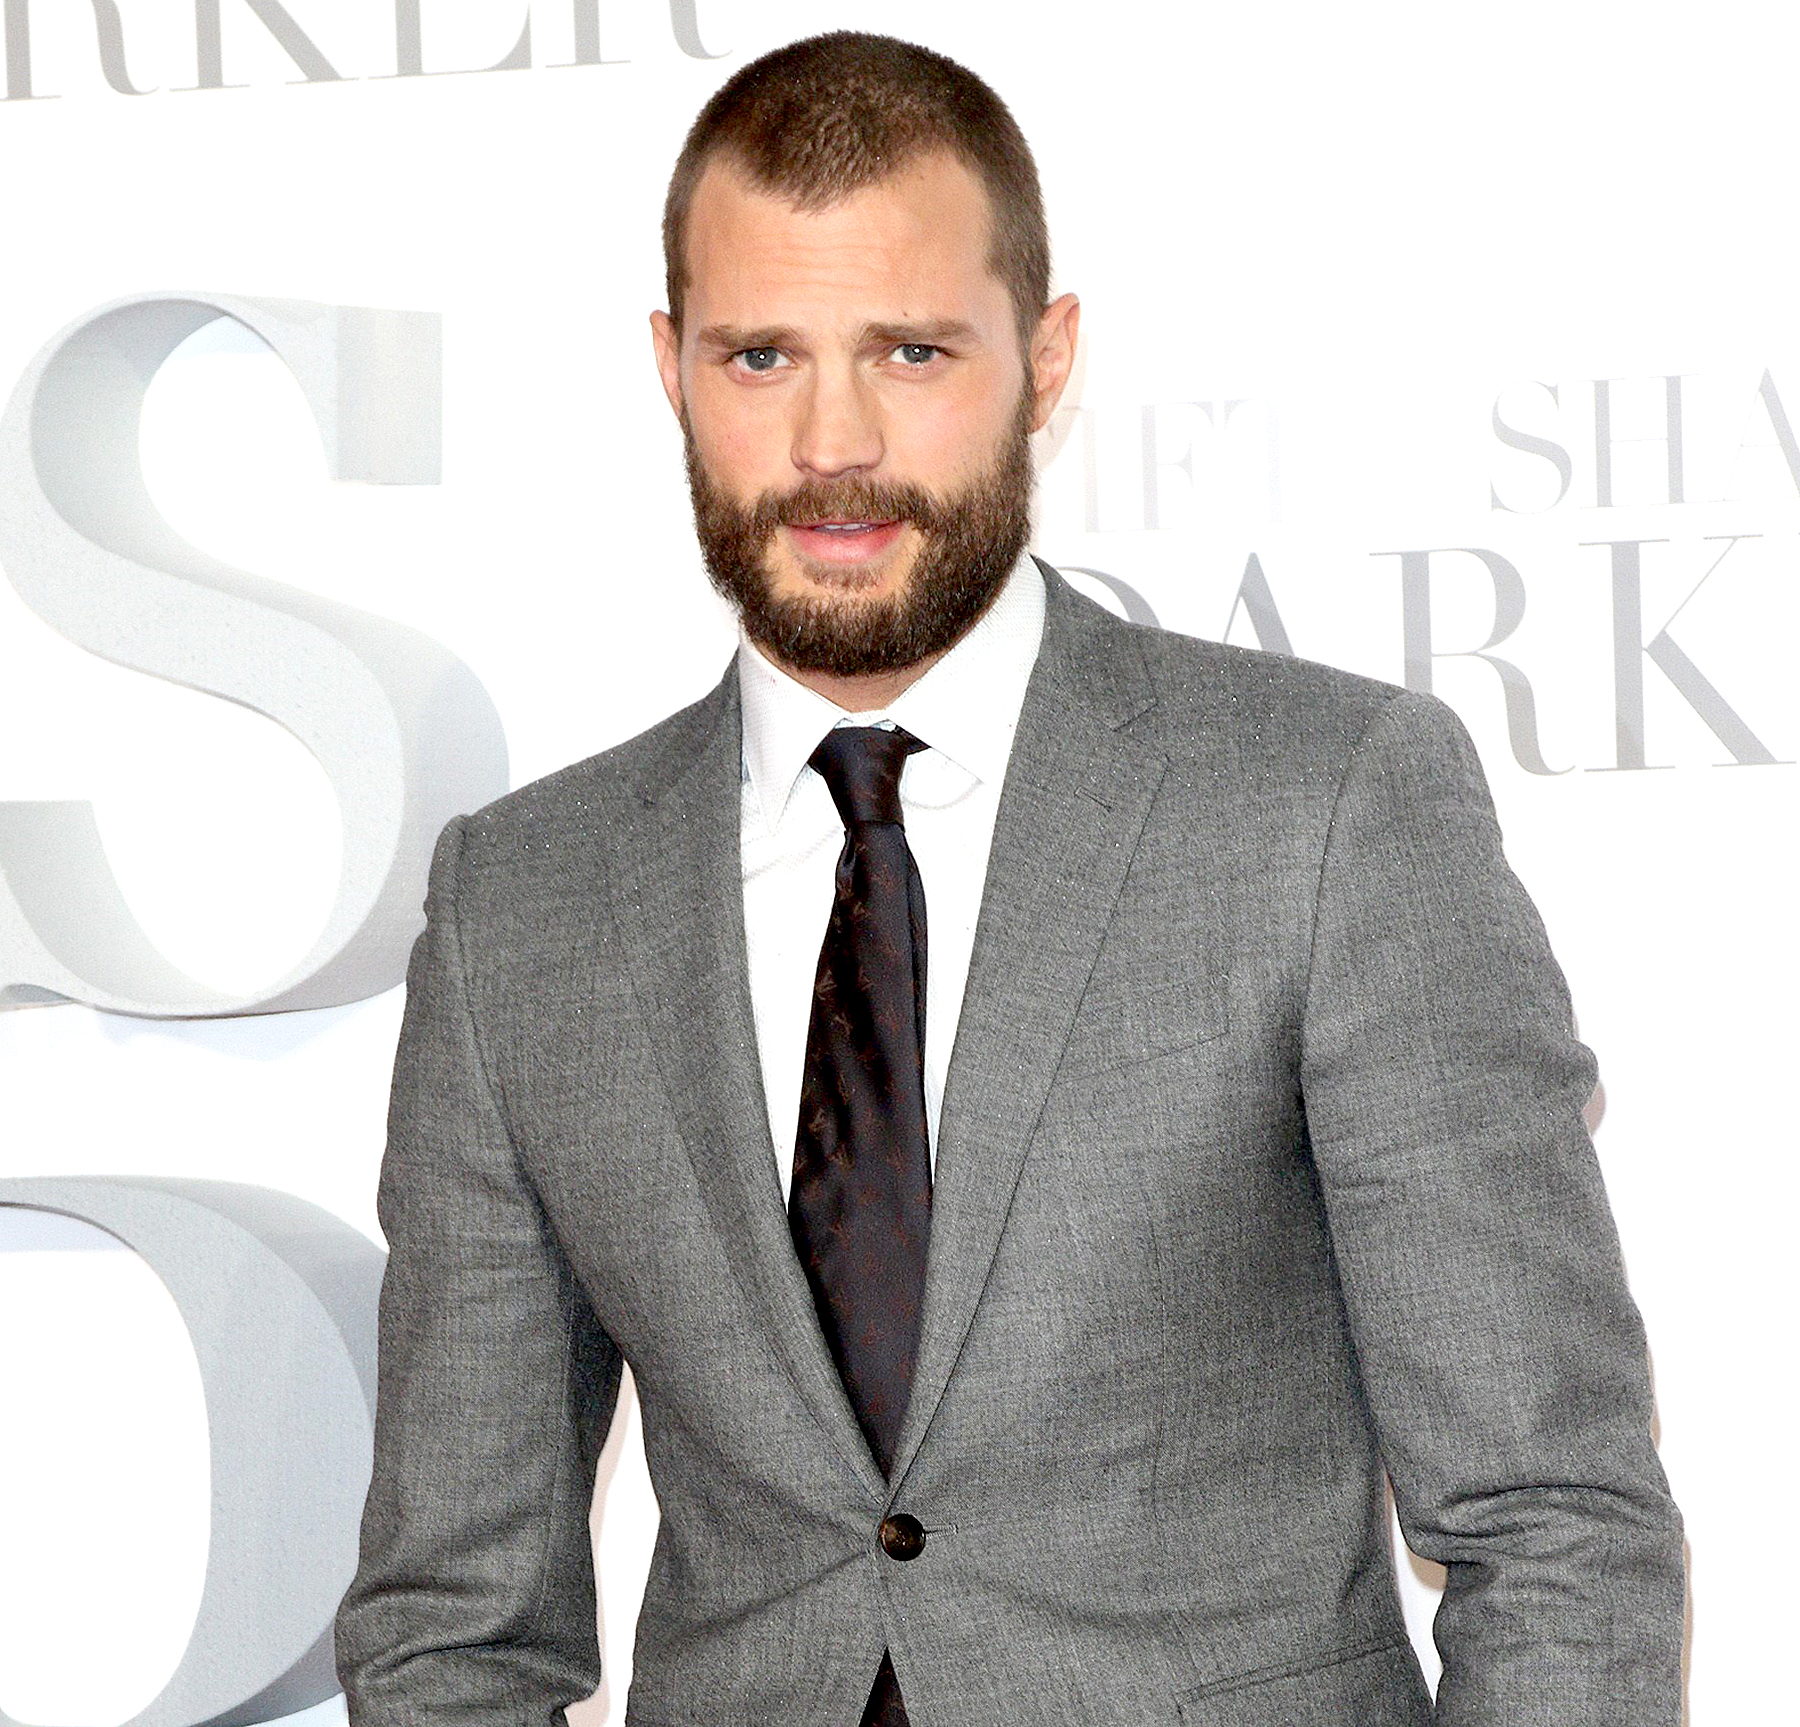 Why Jamie Dornan Said No to Full-Frontal Nudity in 'Fifty Shades Freed'